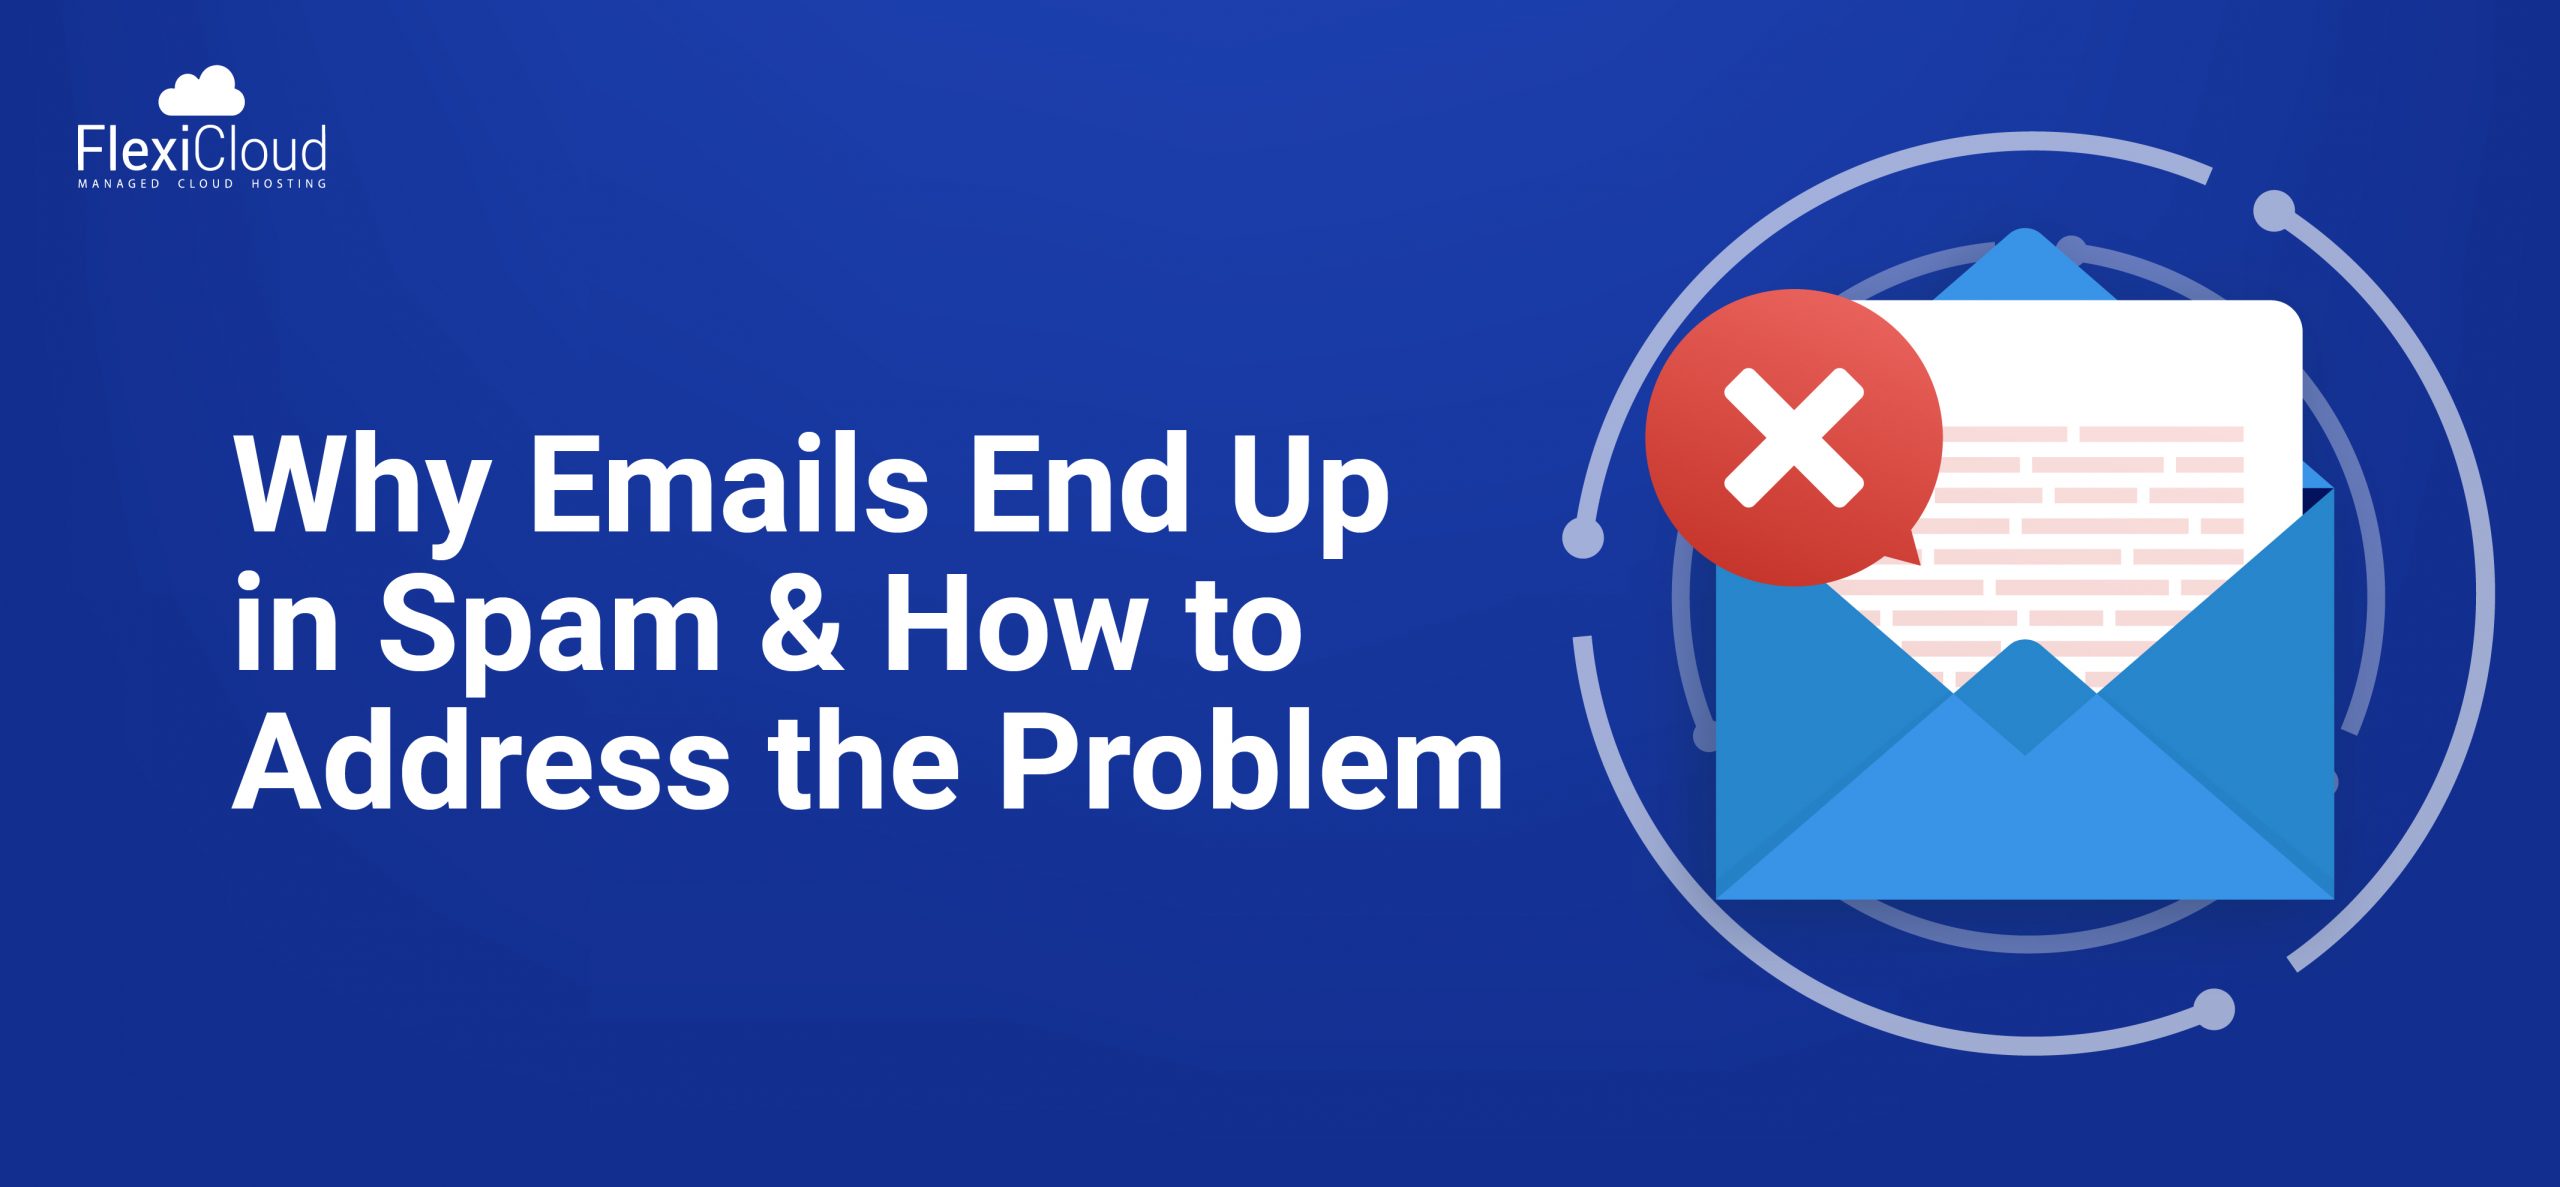 Why Emails End Up in Spam and How to Address the Problem